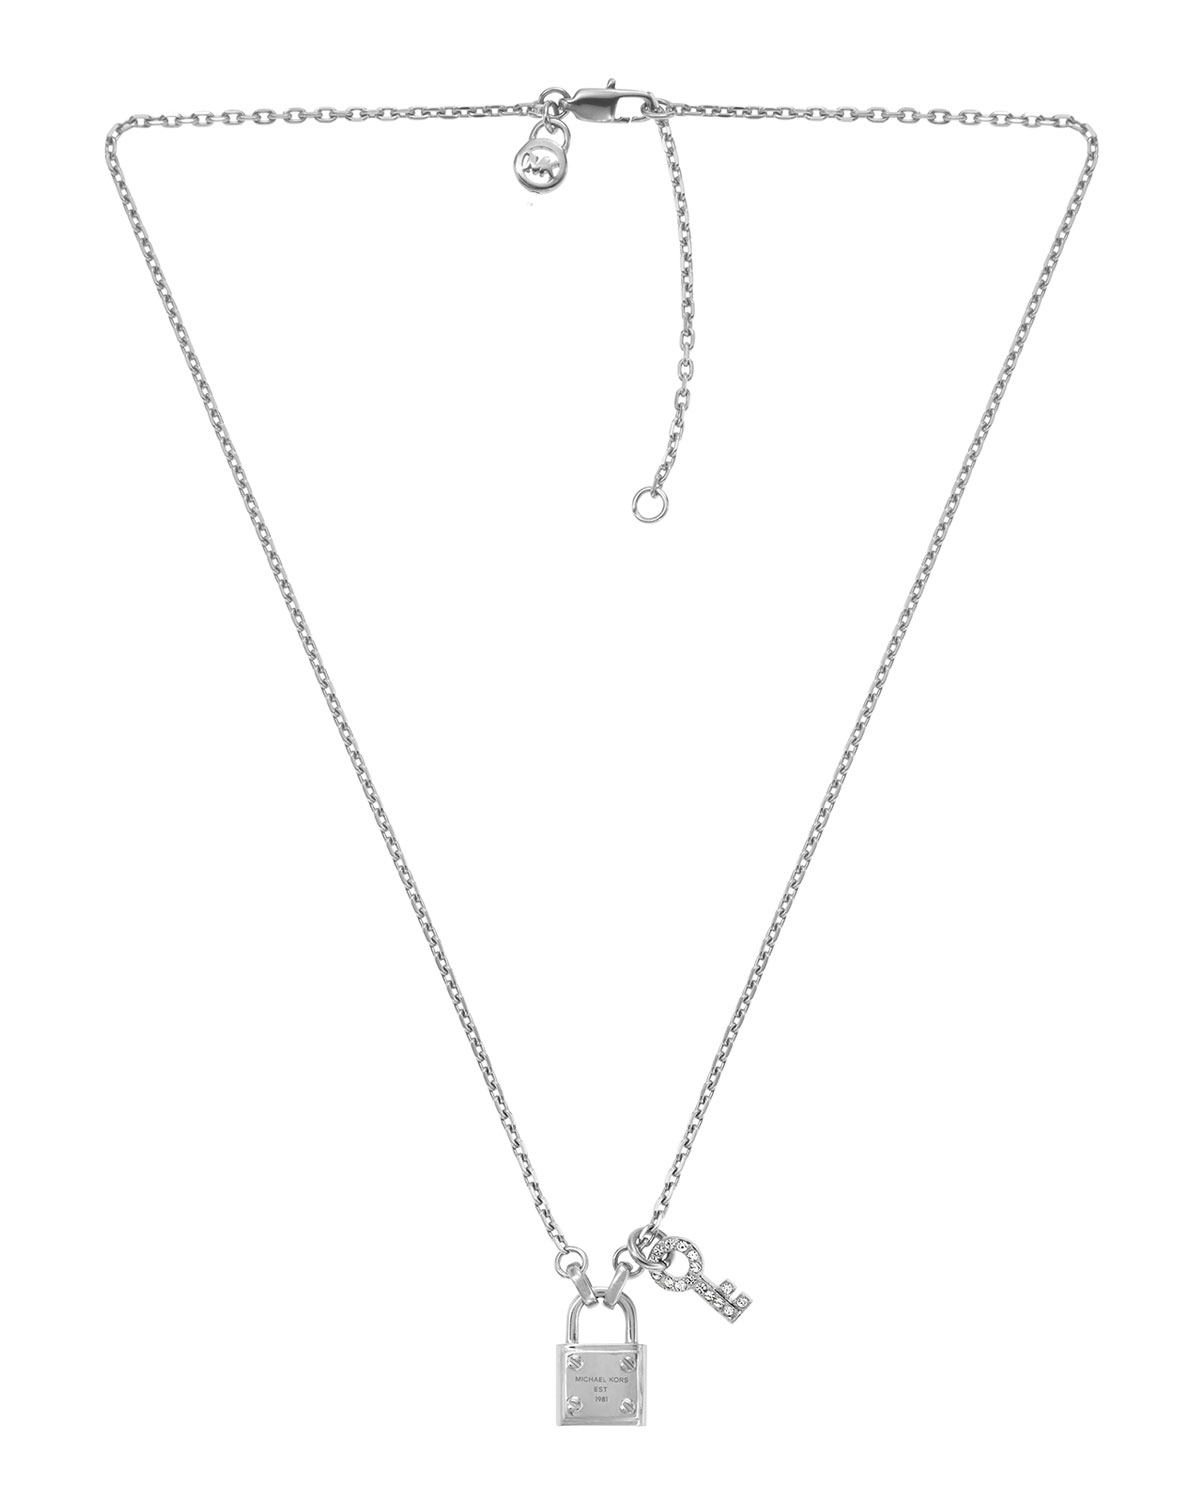 Precious Metalplated Sterling Silver Pavé Heart Necklace And Stud Earrings  Set  Michael Kors